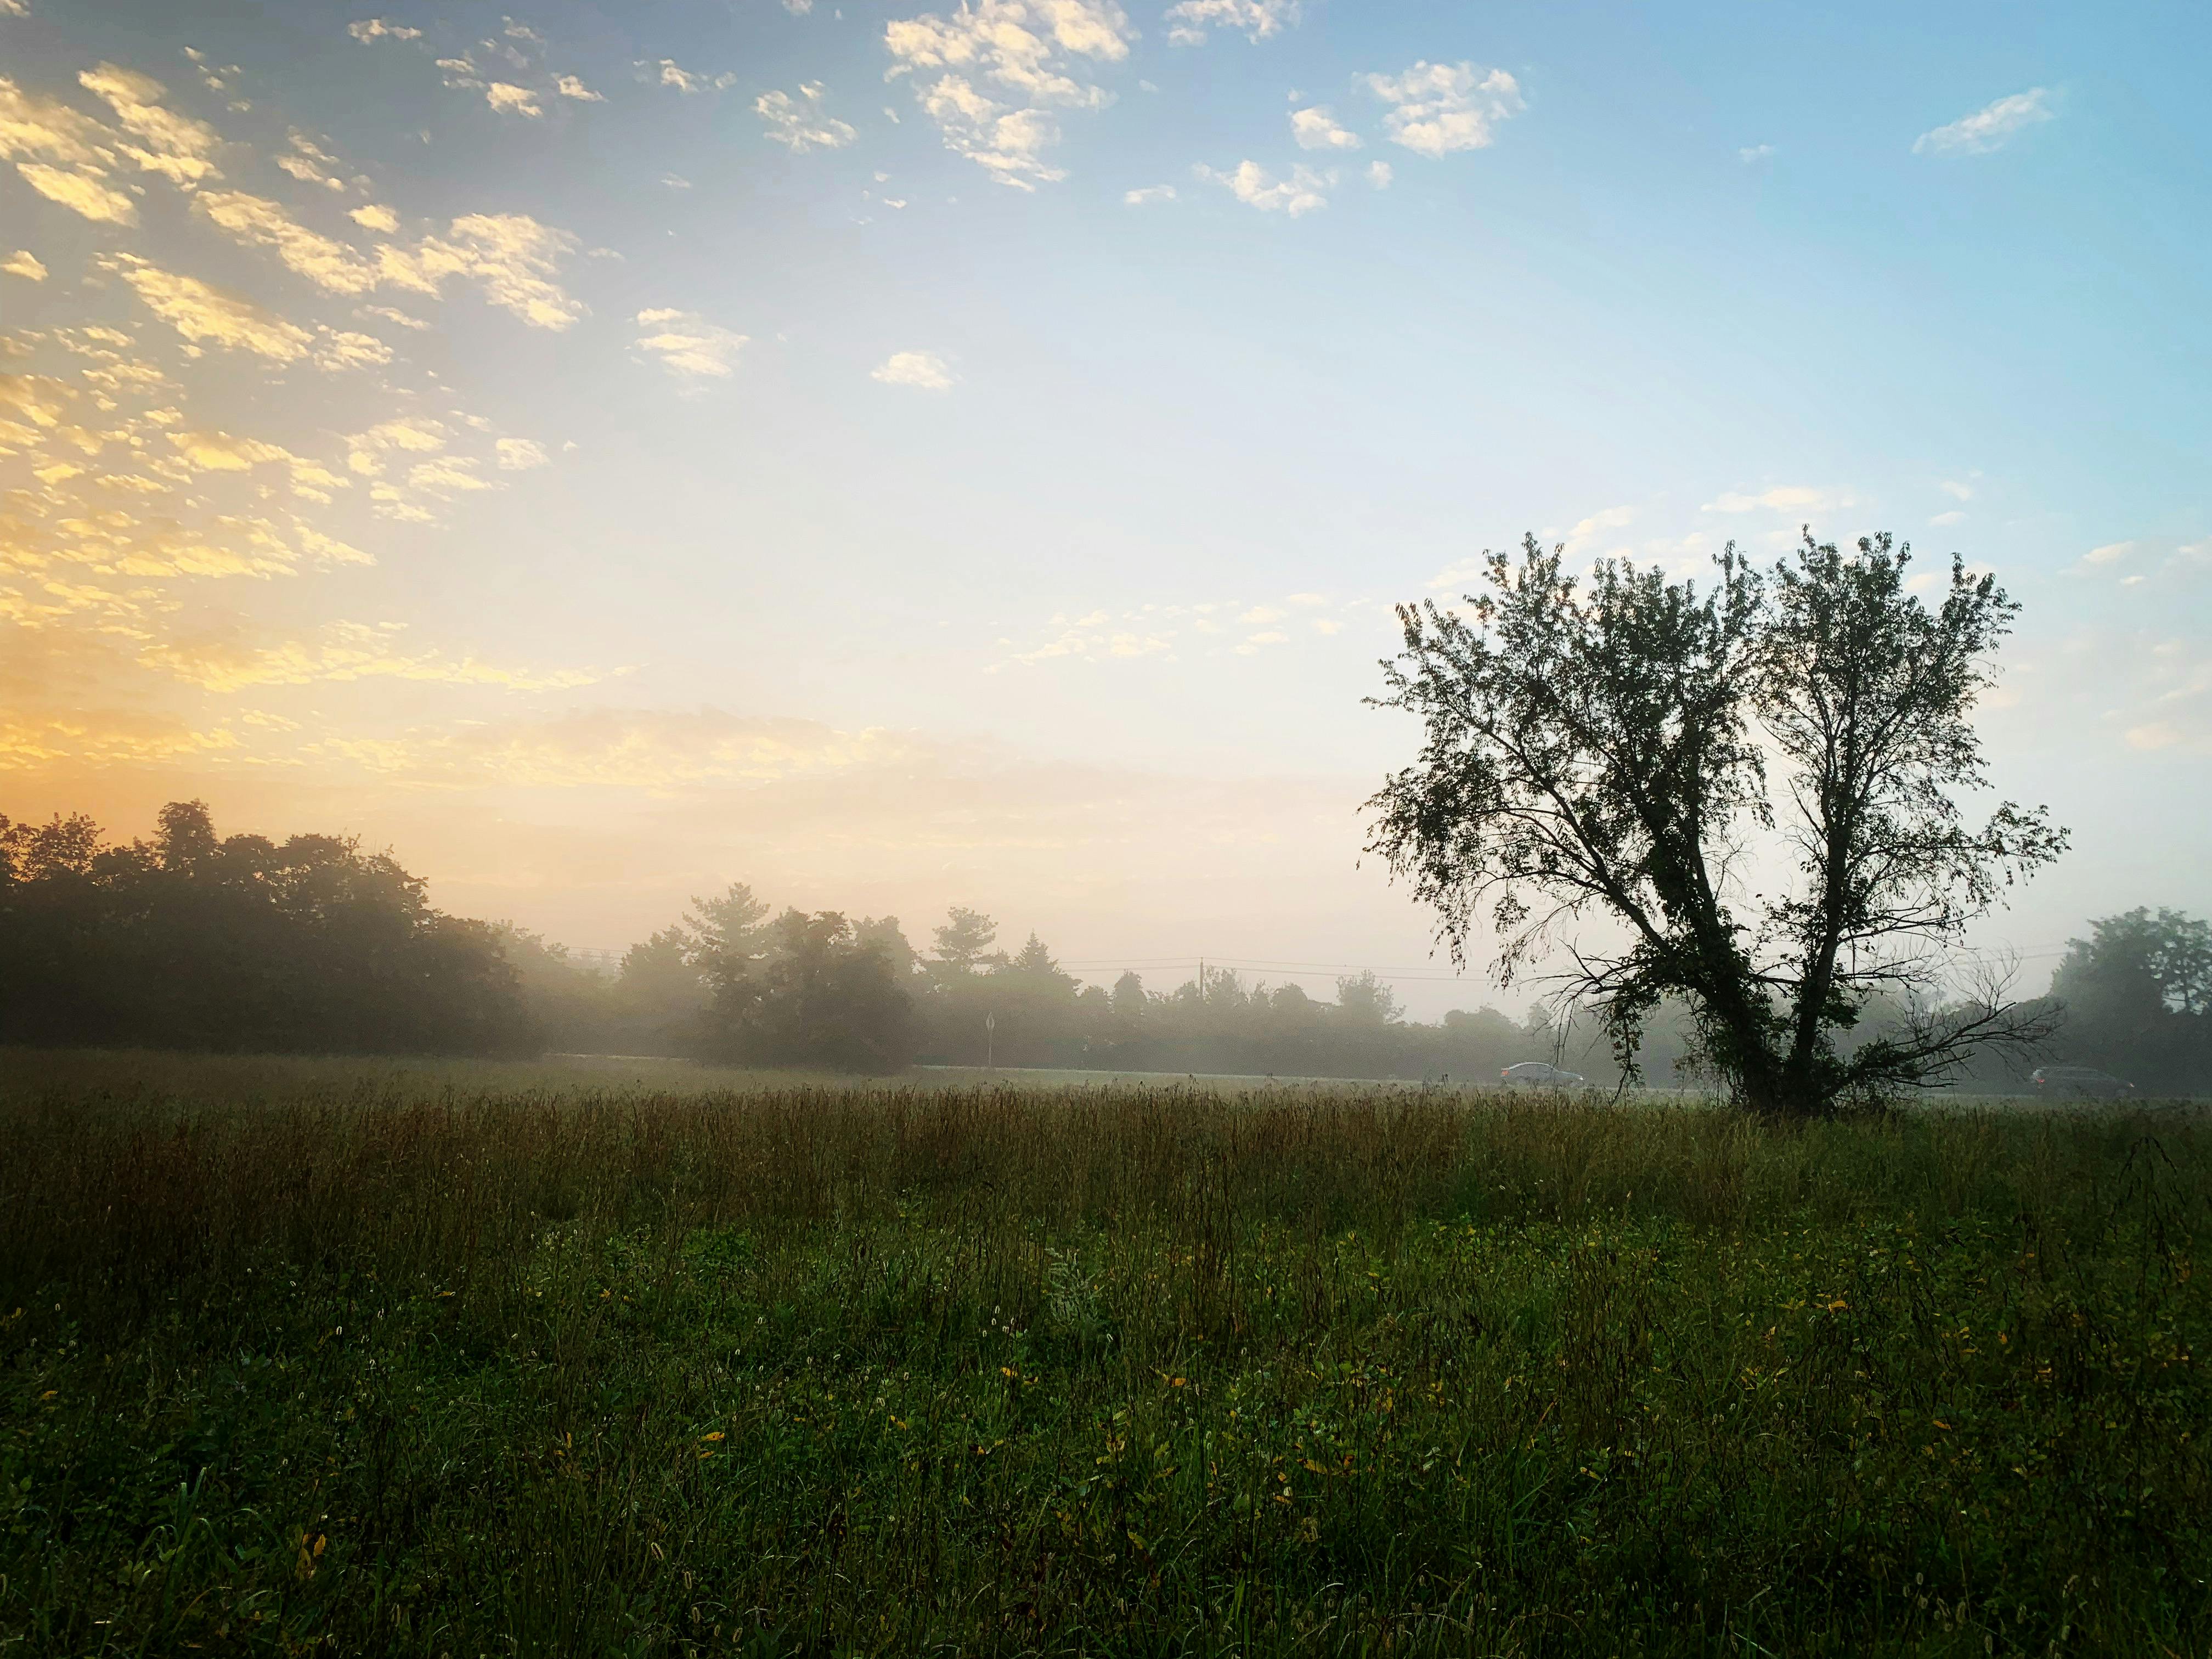 A tree in a field on a misty morning at sunrise.